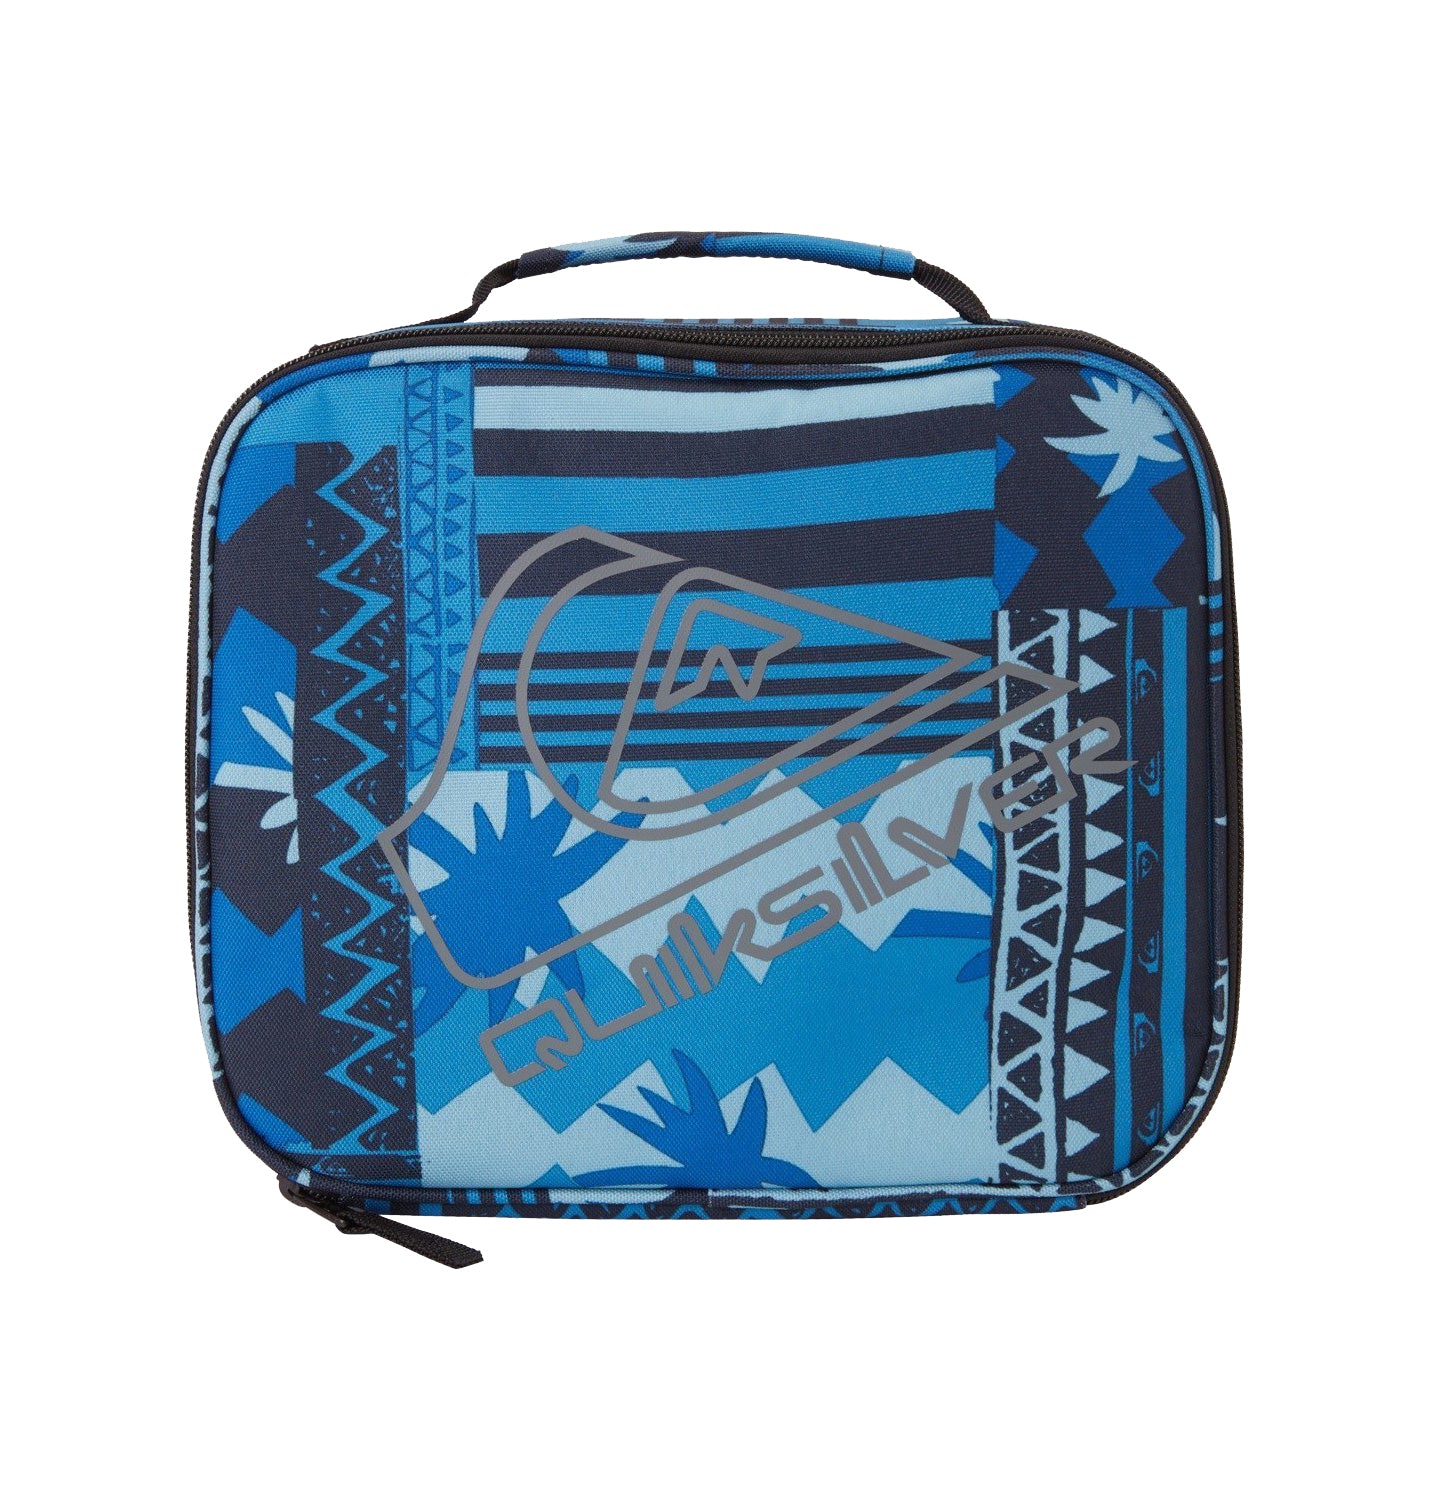 Quiksilver Boys 8-16 Lunch Boxer Lunch Box BYJ6 OS